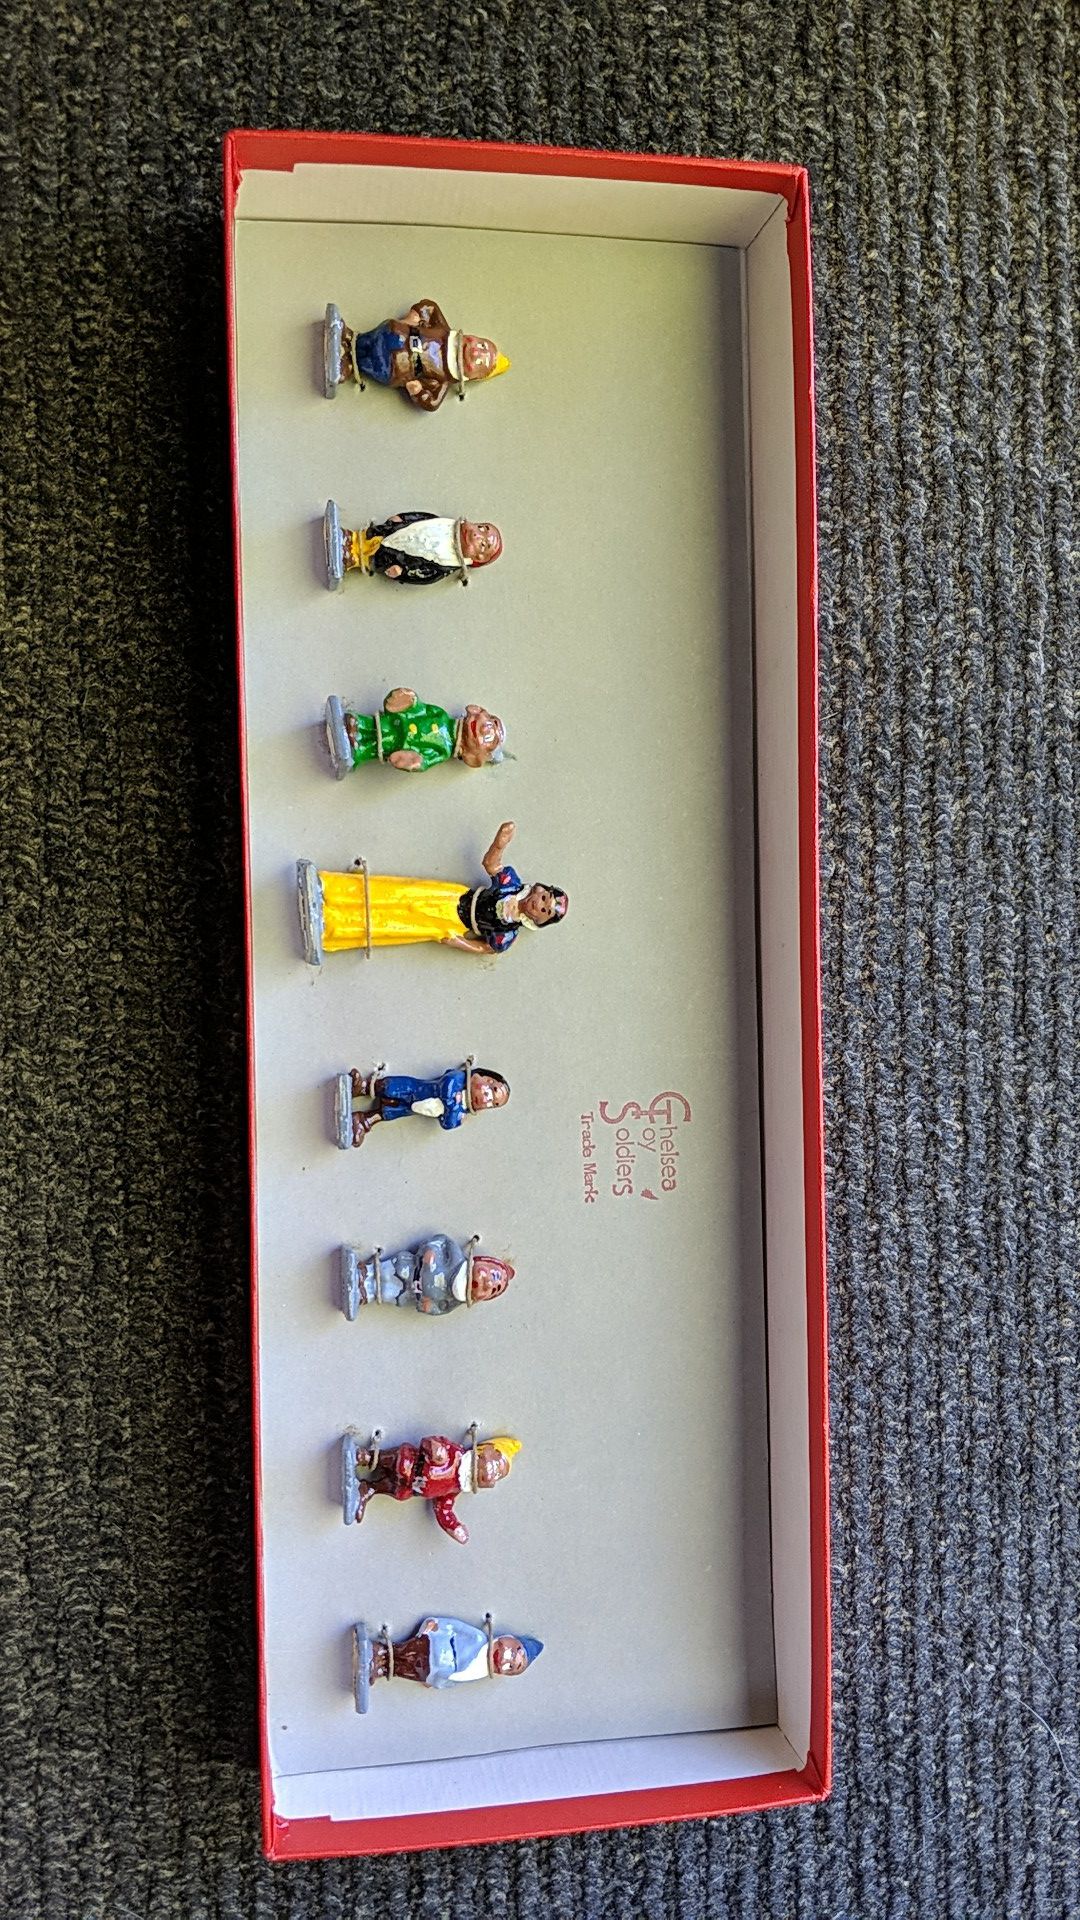 Vintage Lead Toy Figures, "Snow White and the 7 Dwarfs "